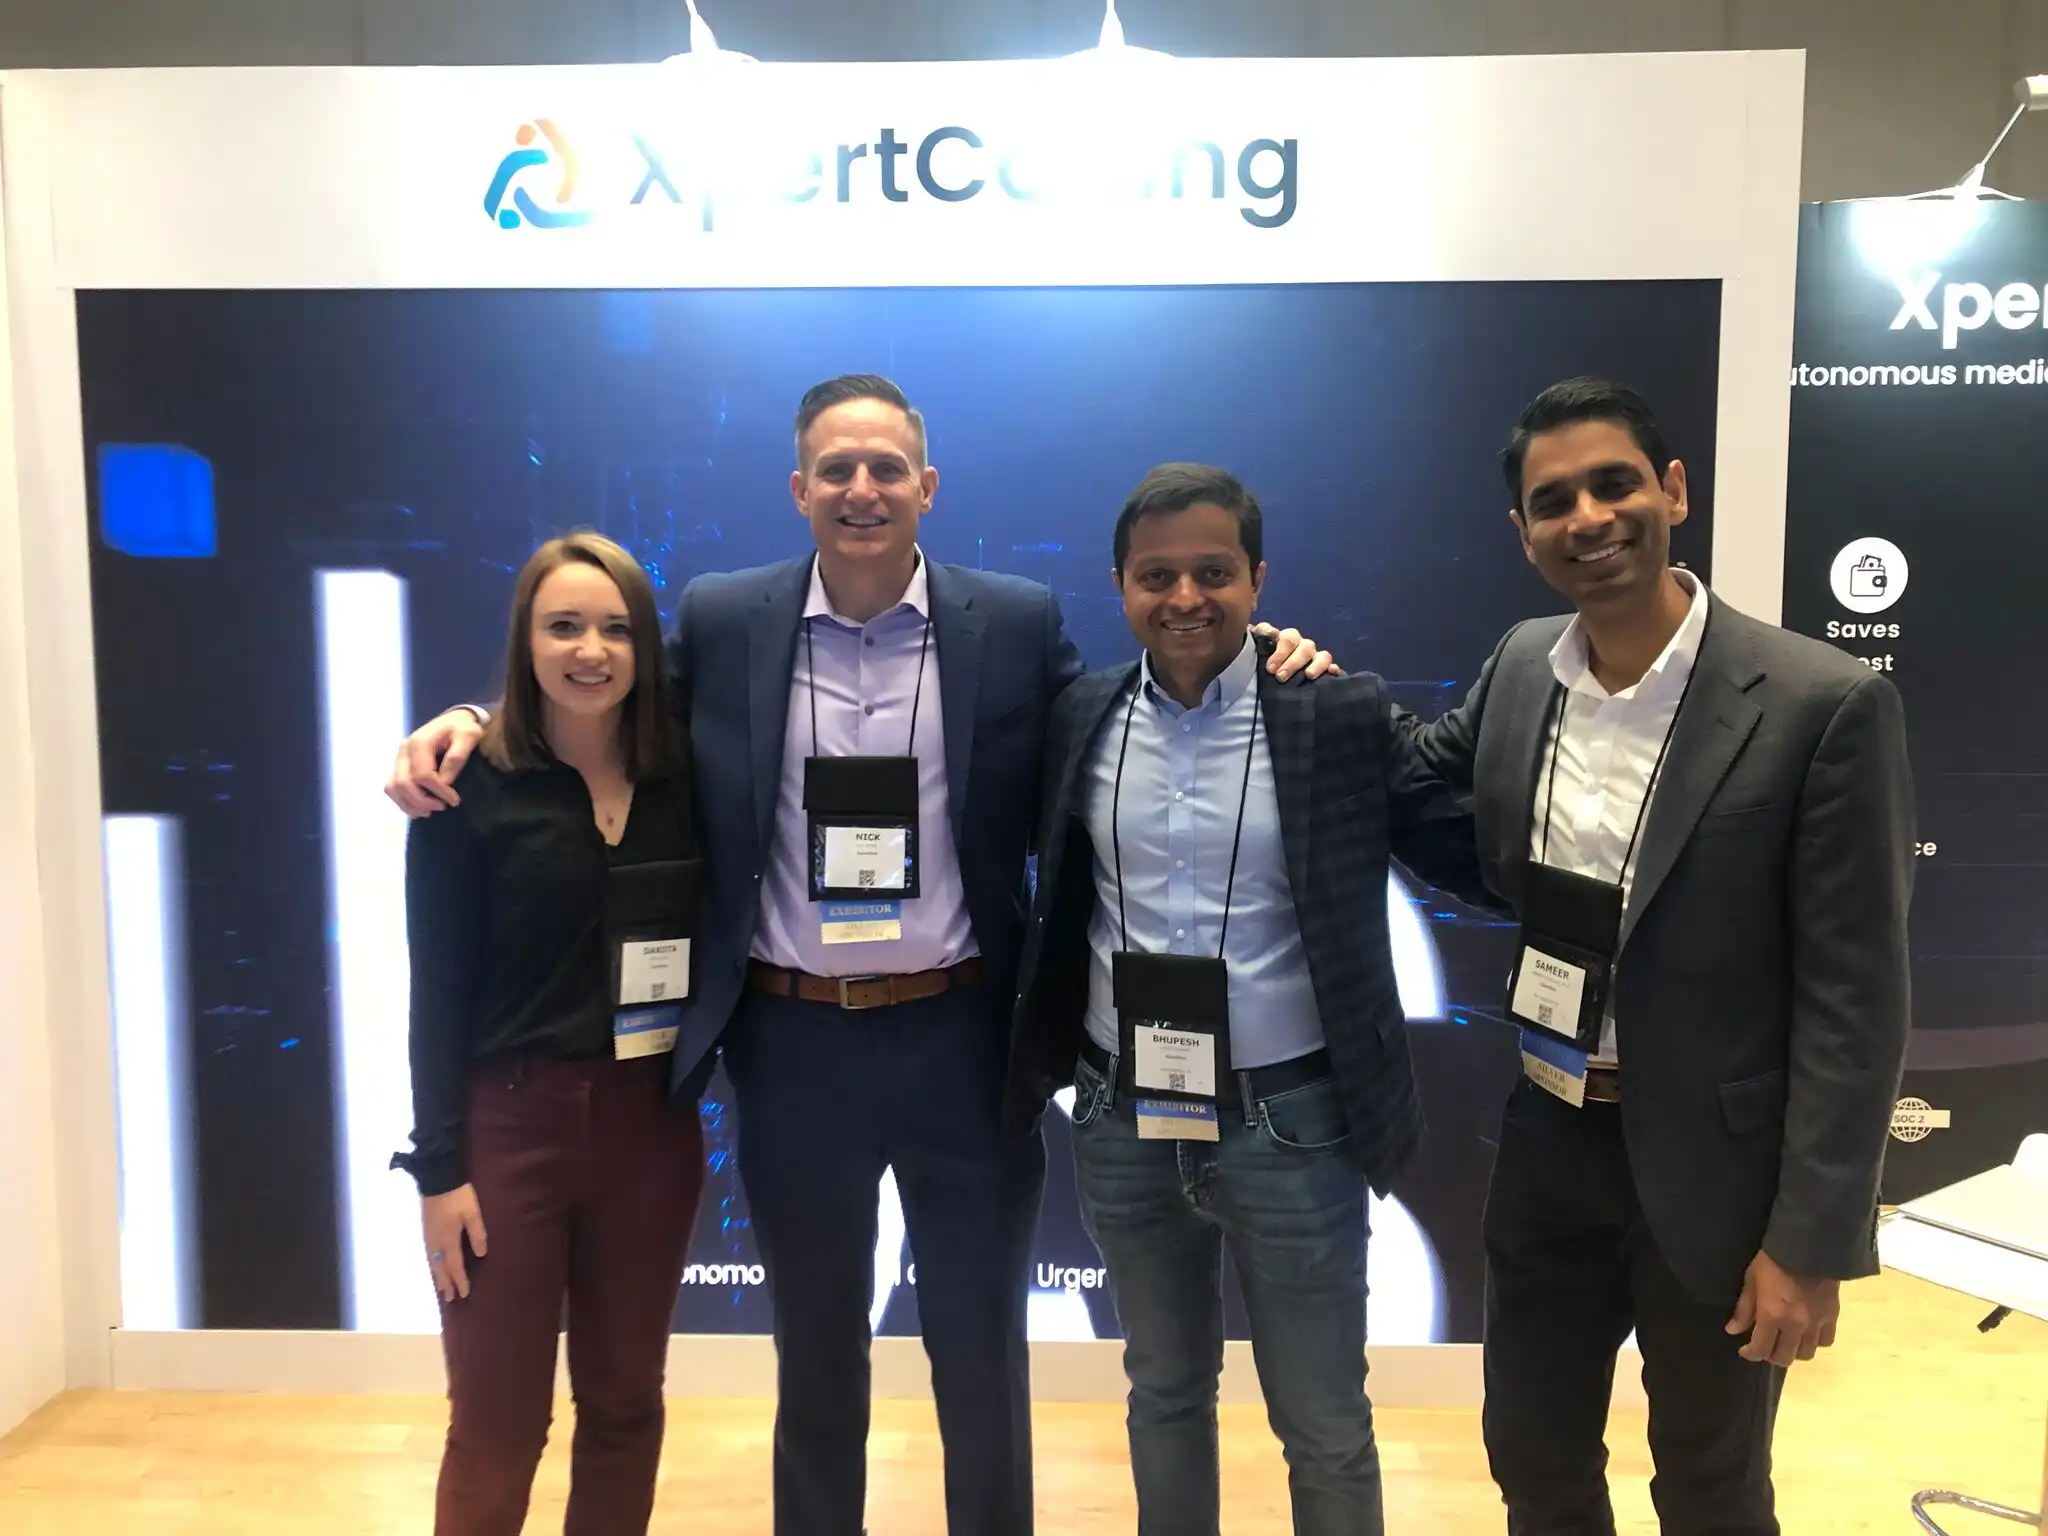 From left to right, Dakota Tippet, Nick Pierce, Dr. Bhupesh Panwar, and Dr. Sameer Ather in front of the XpertCoding booth at the Urgent Care Conference 2023.